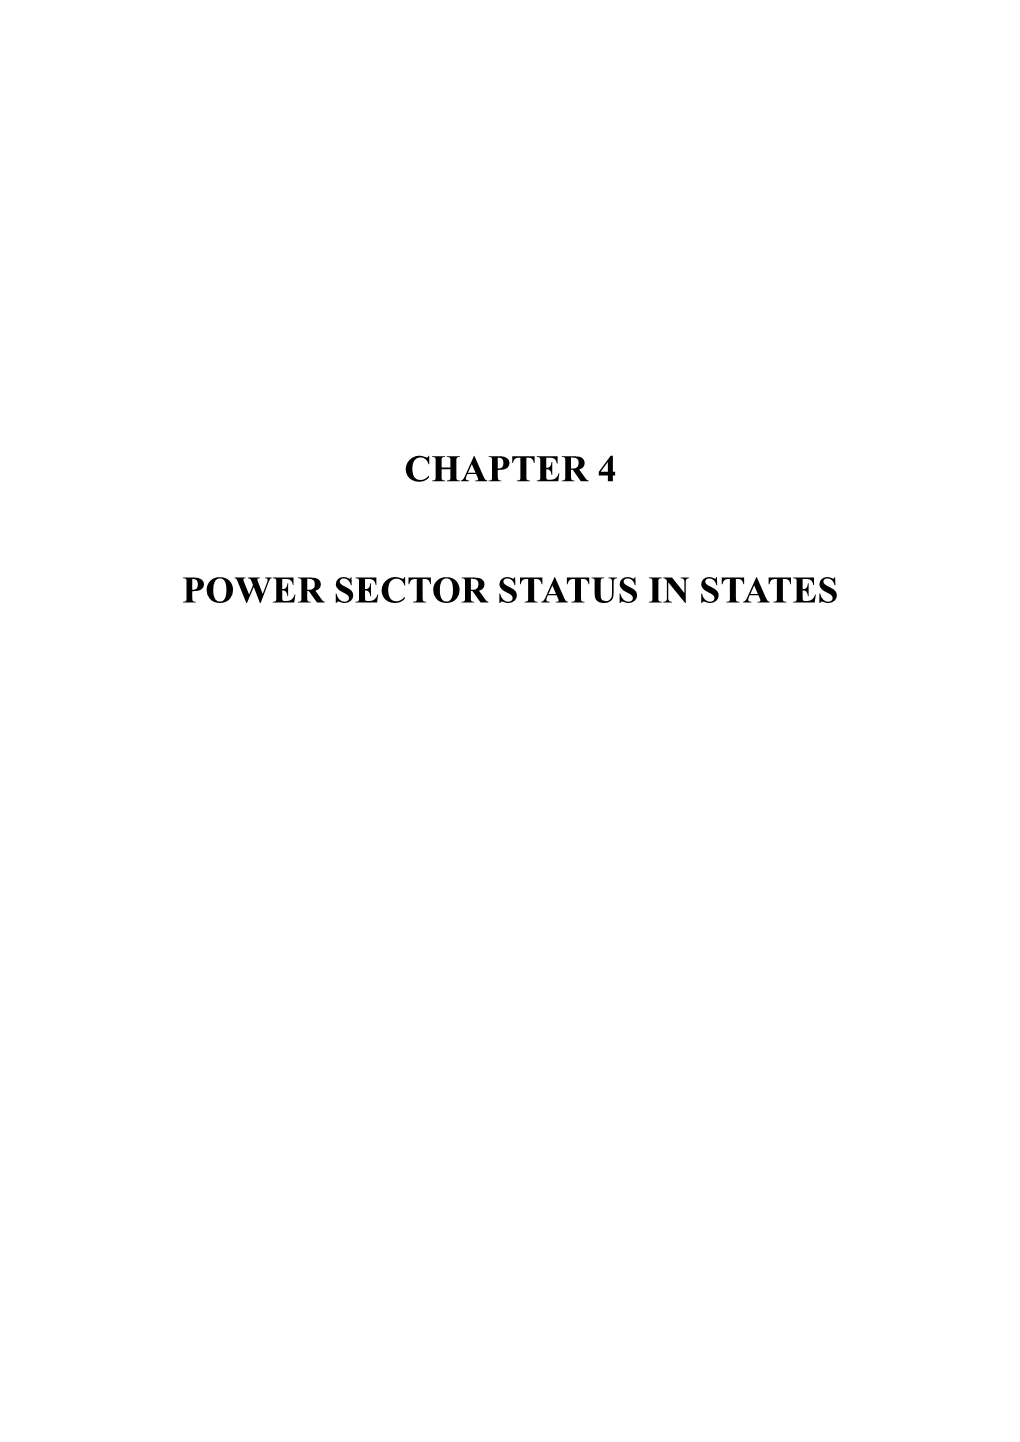 Chapter 4 Power Sector Status in States